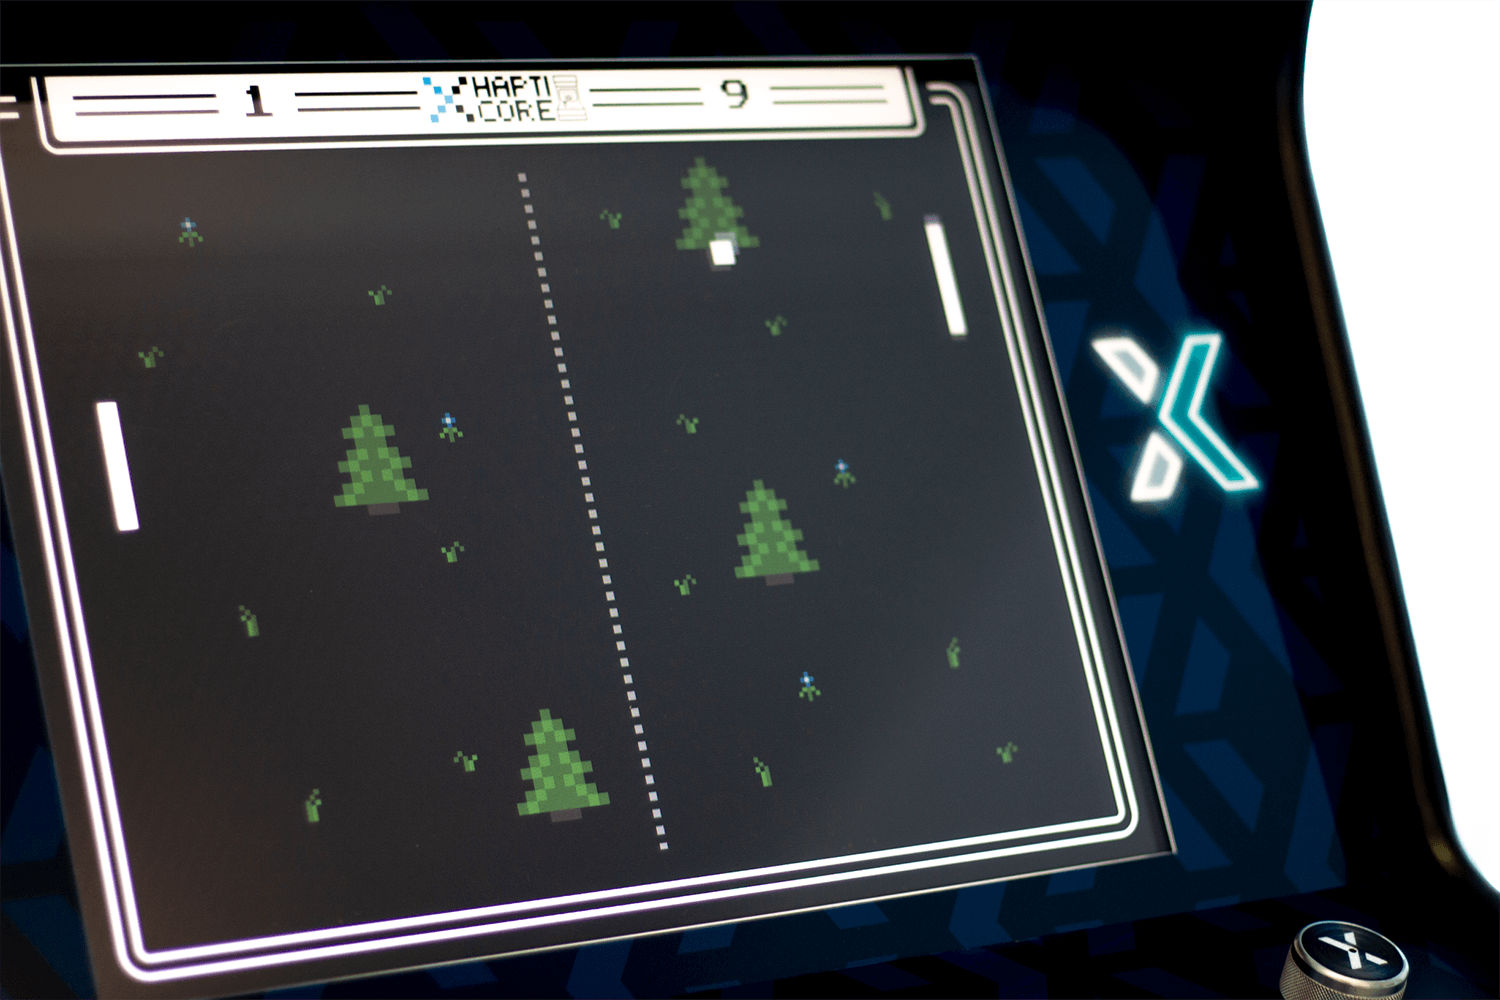 The image shows a close-up of the HAPTICORE Arcade screen with 8-bit pixel graphics of trees, a ball, and a cursor. The cursor is controlled by a HAPTICORE rotary haptic actuator. The haptic feedback varies depending on the background and changes every few seconds.